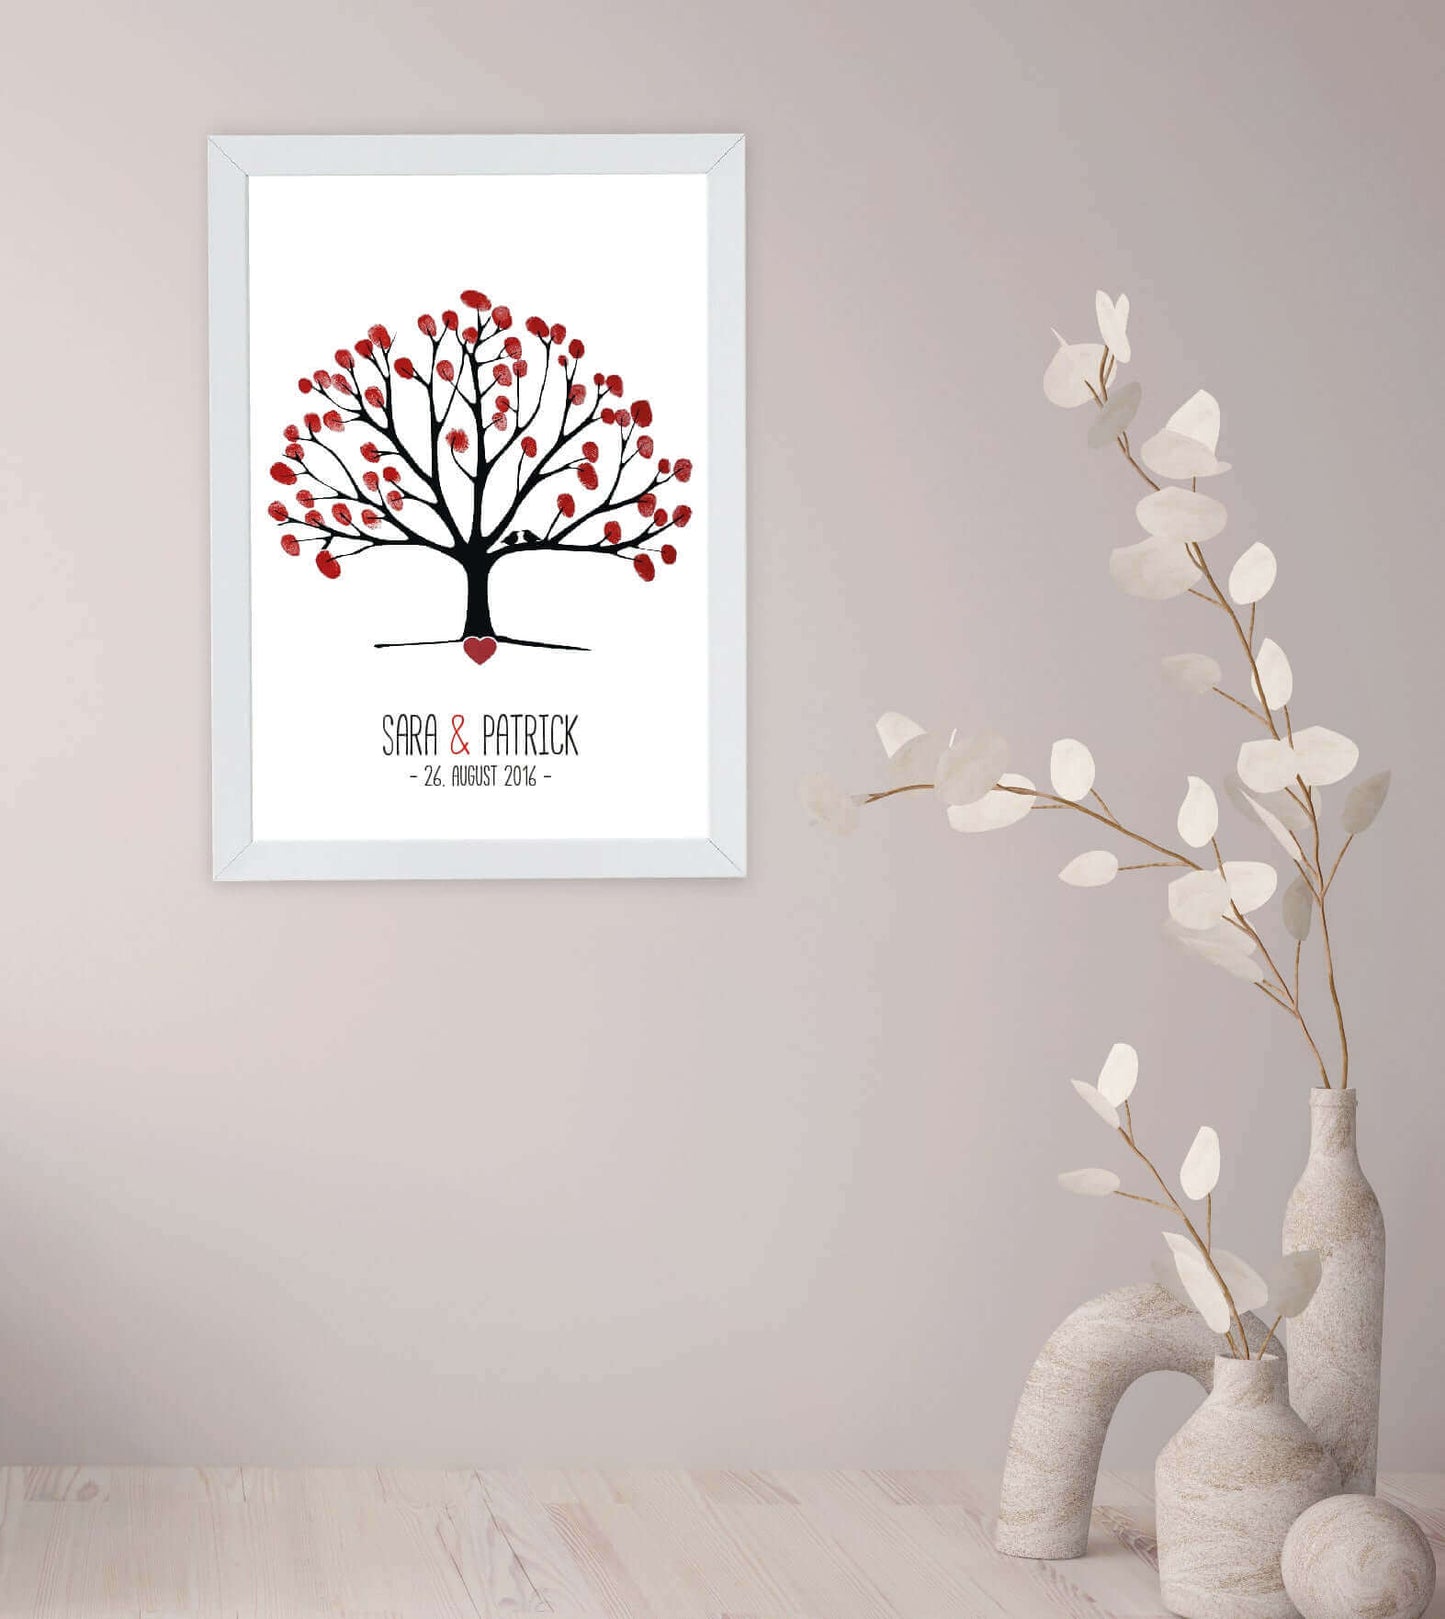 Personalized picture "Wedding tree"